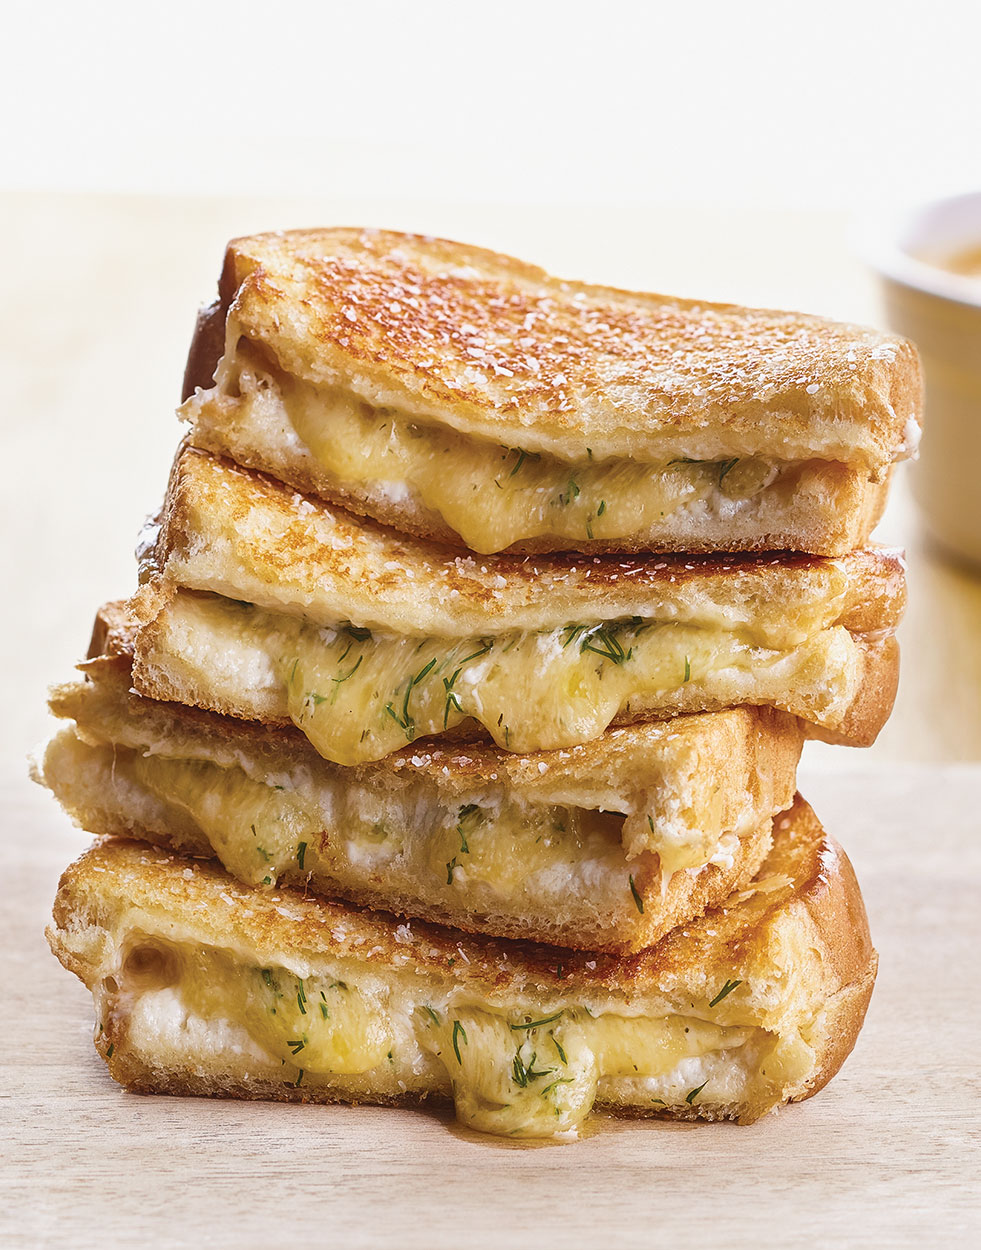 Dill Havarti Grilled Cheese